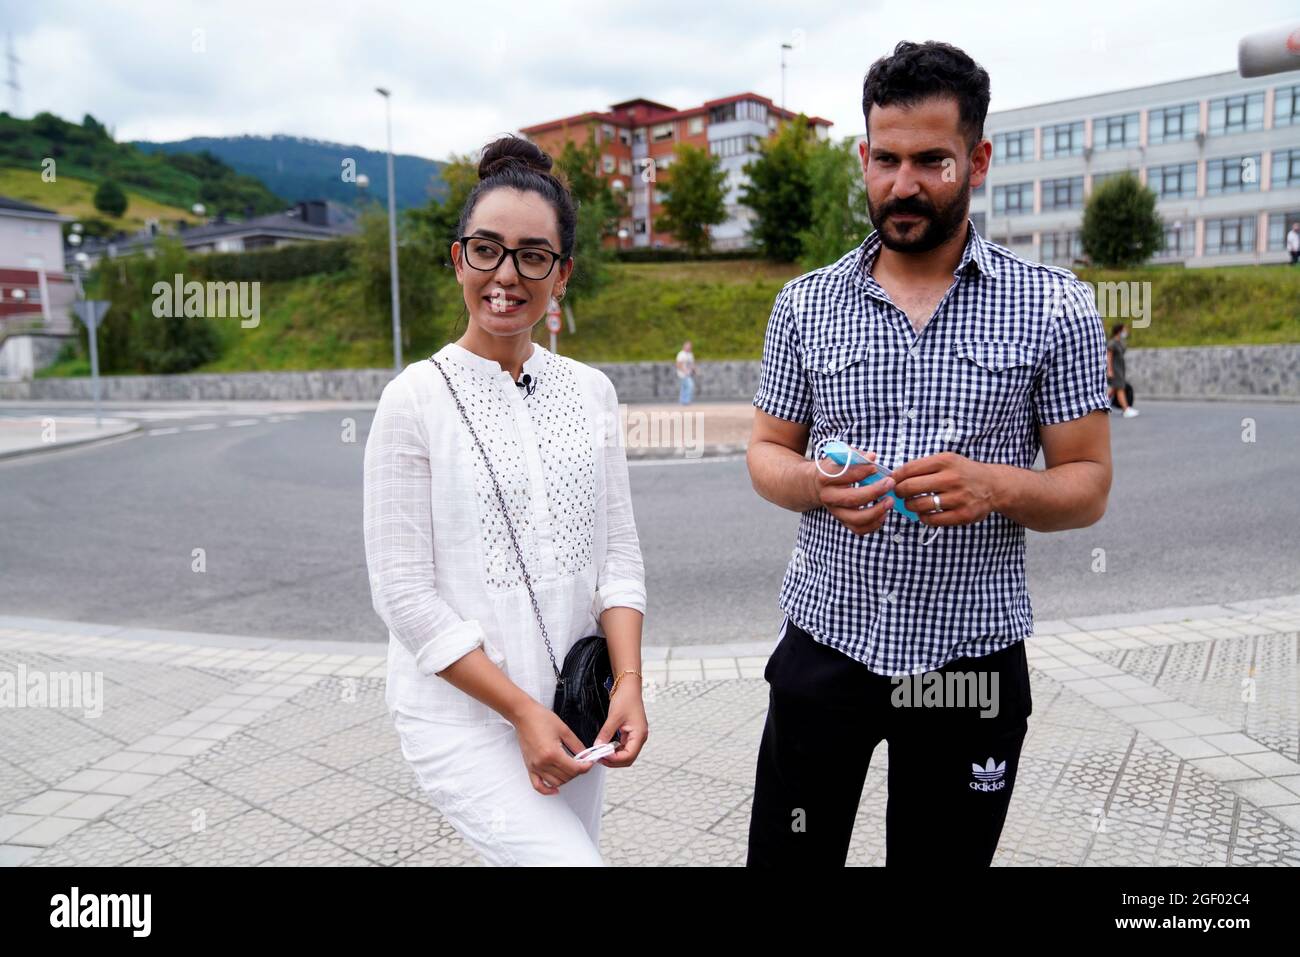 Afghan national women's wheelchair basketball team captain Nilofar Bayat  stands with her husband Ramish Naik Zai in Bilbao, Spain, August 22, 2021.  REUTERS/Vincent West Stock Photo - Alamy